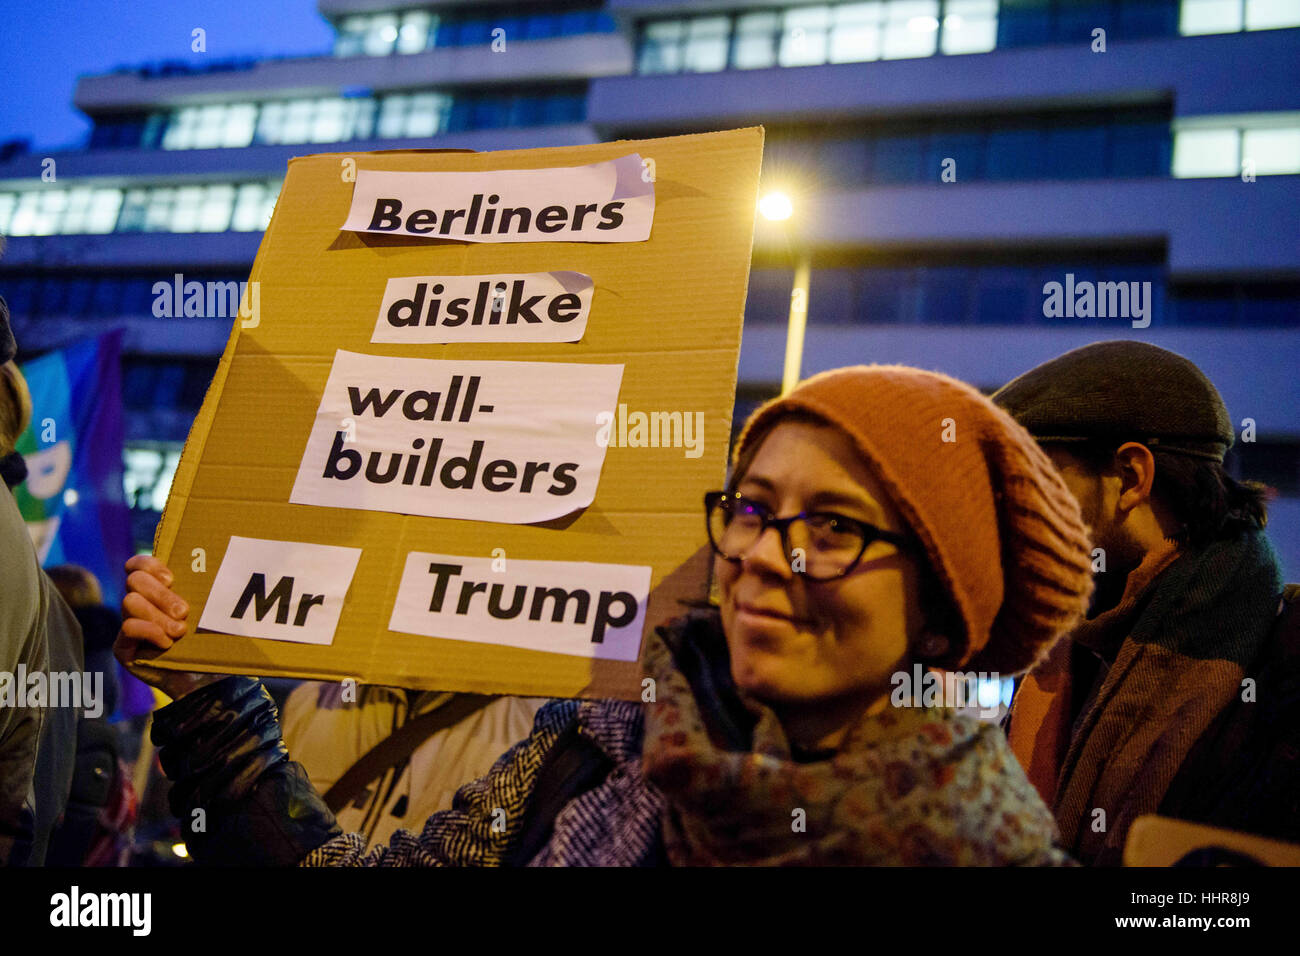 Berlin, Germany. 20th Jan, 2017. A participant holding up a sign that reads 'Berliners dislike wallbuilders Mr Trump' at the demonstration 'Nein zum weltweiten Trumpismus' (lt. No to worldwide Trumpism) from the initiative 'The Coalition' in Berlin, Germany, 20 January 2017. Photo: Gregor Fischer/dpa/Alamy Live News Stock Photo